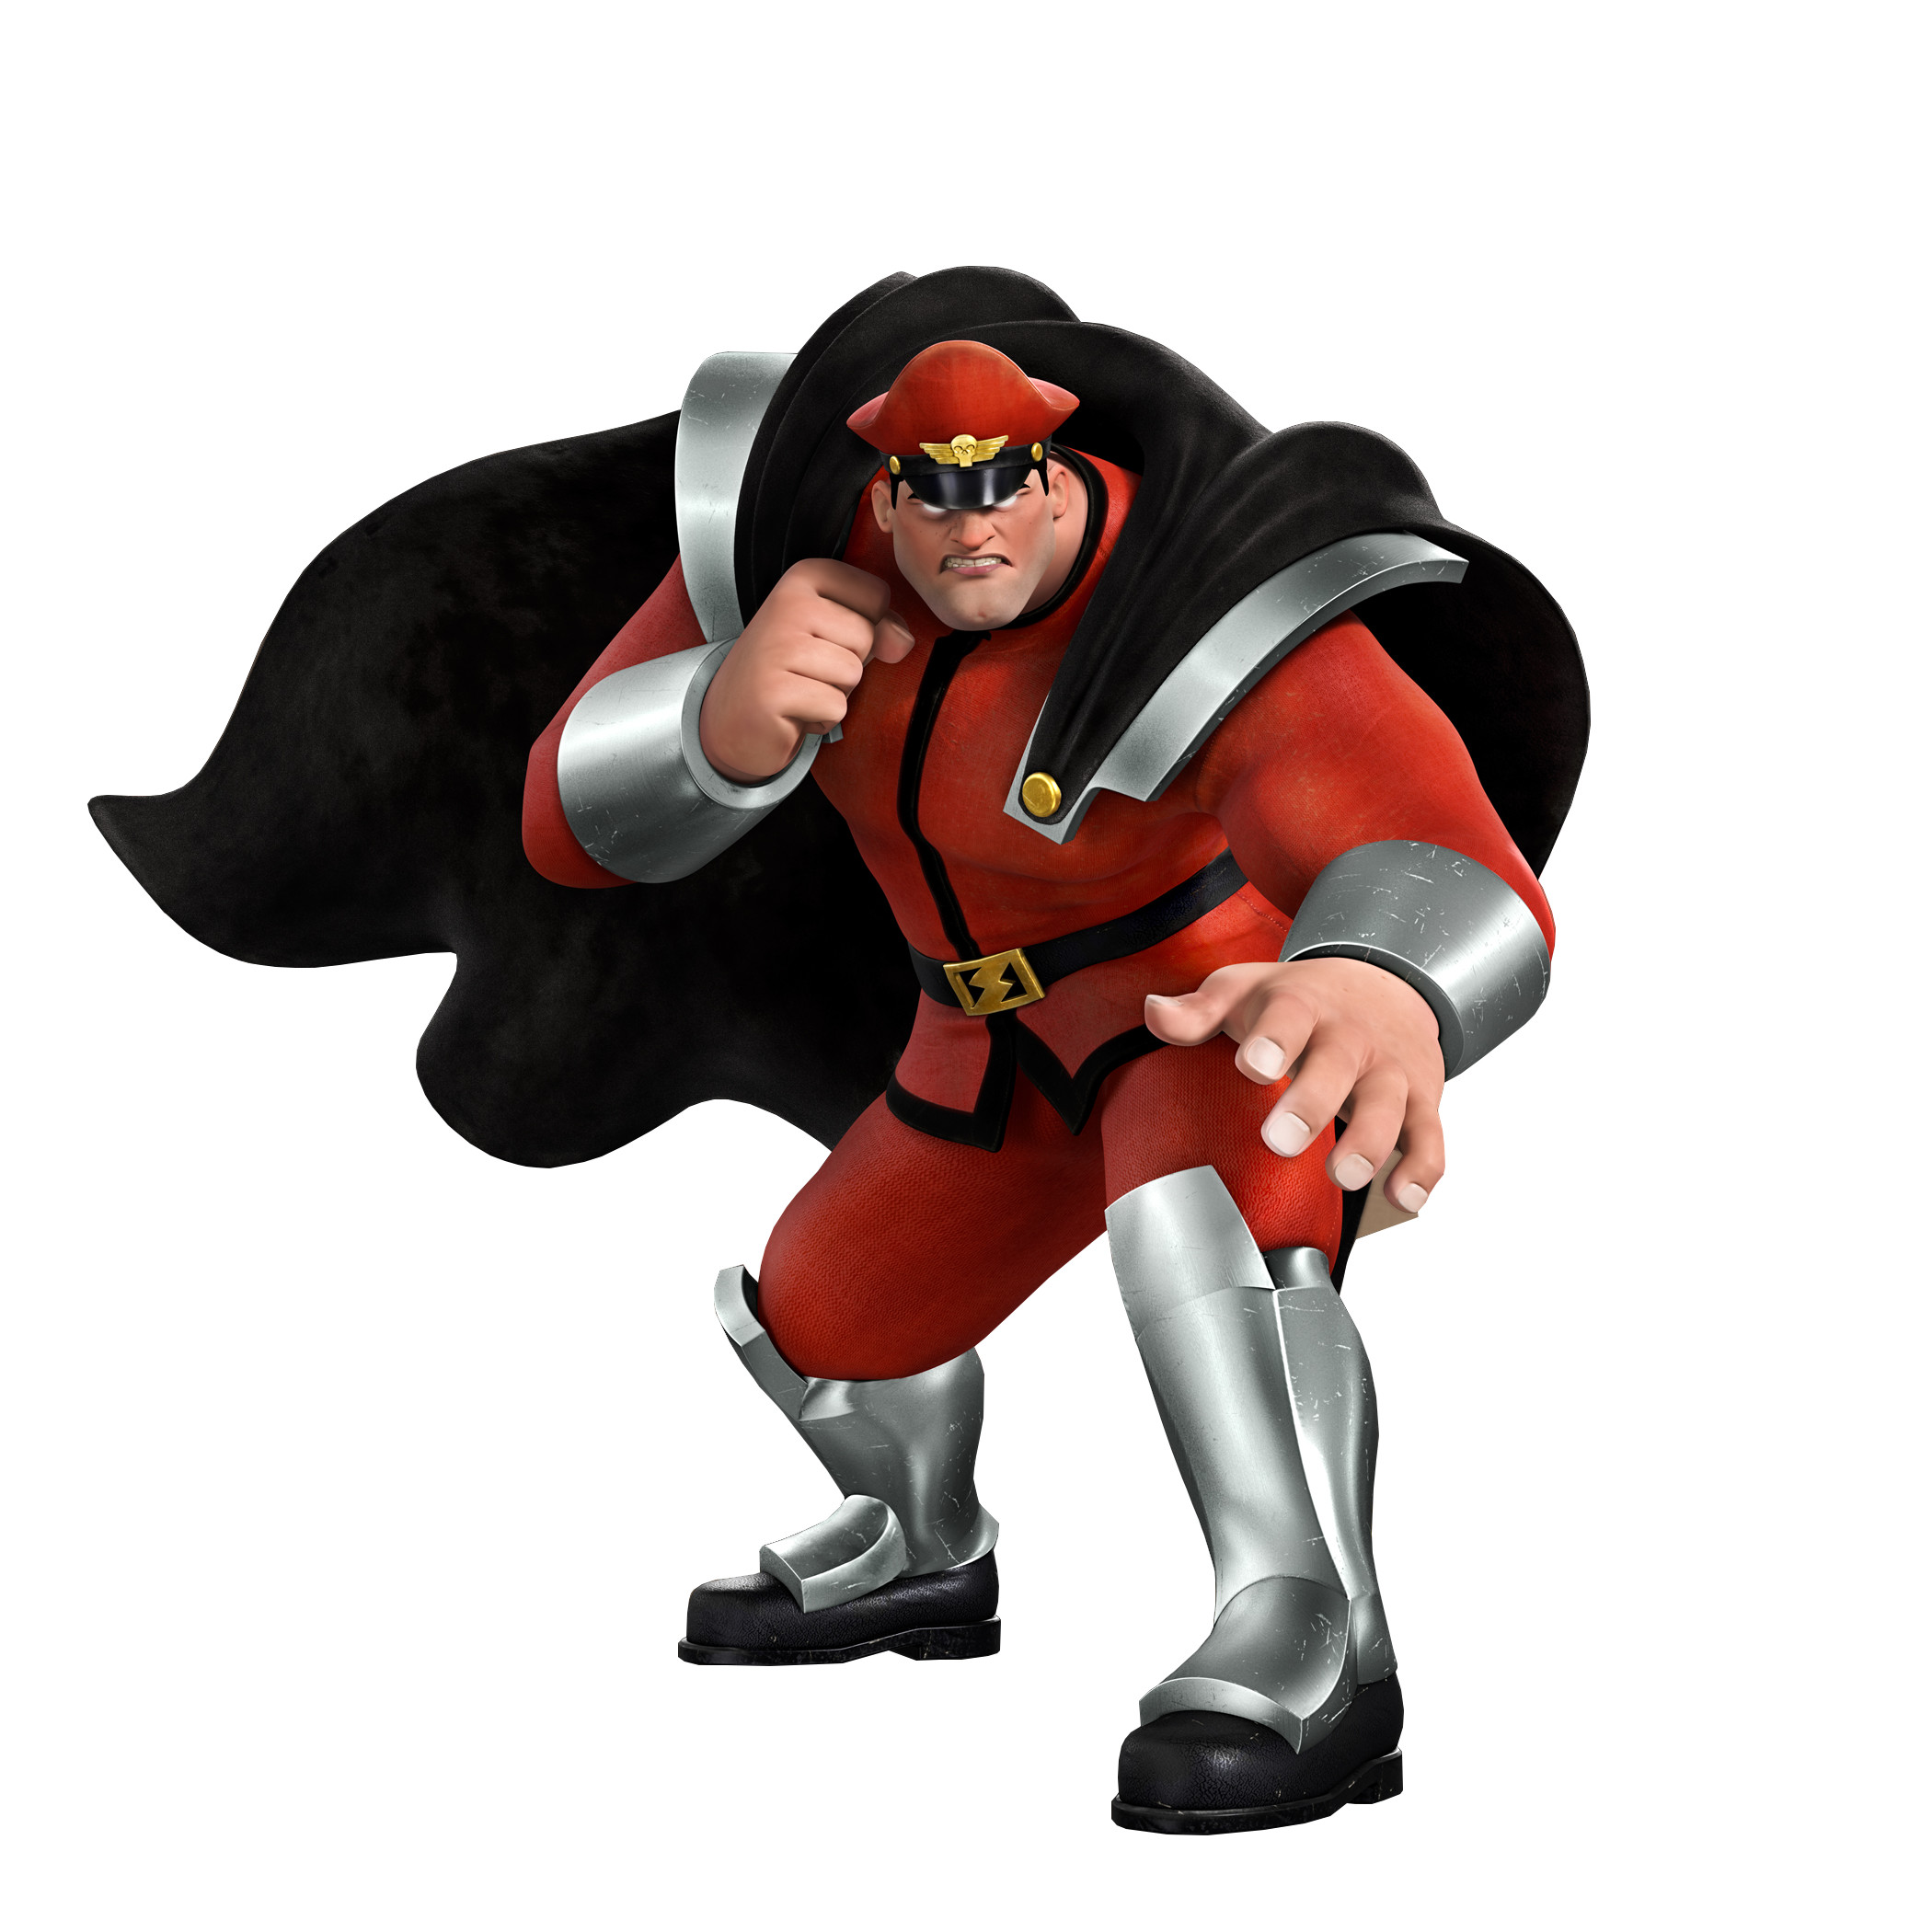 2100x2100 ... Wreck-it Ralph M.Bison Render by The-Blacklisted